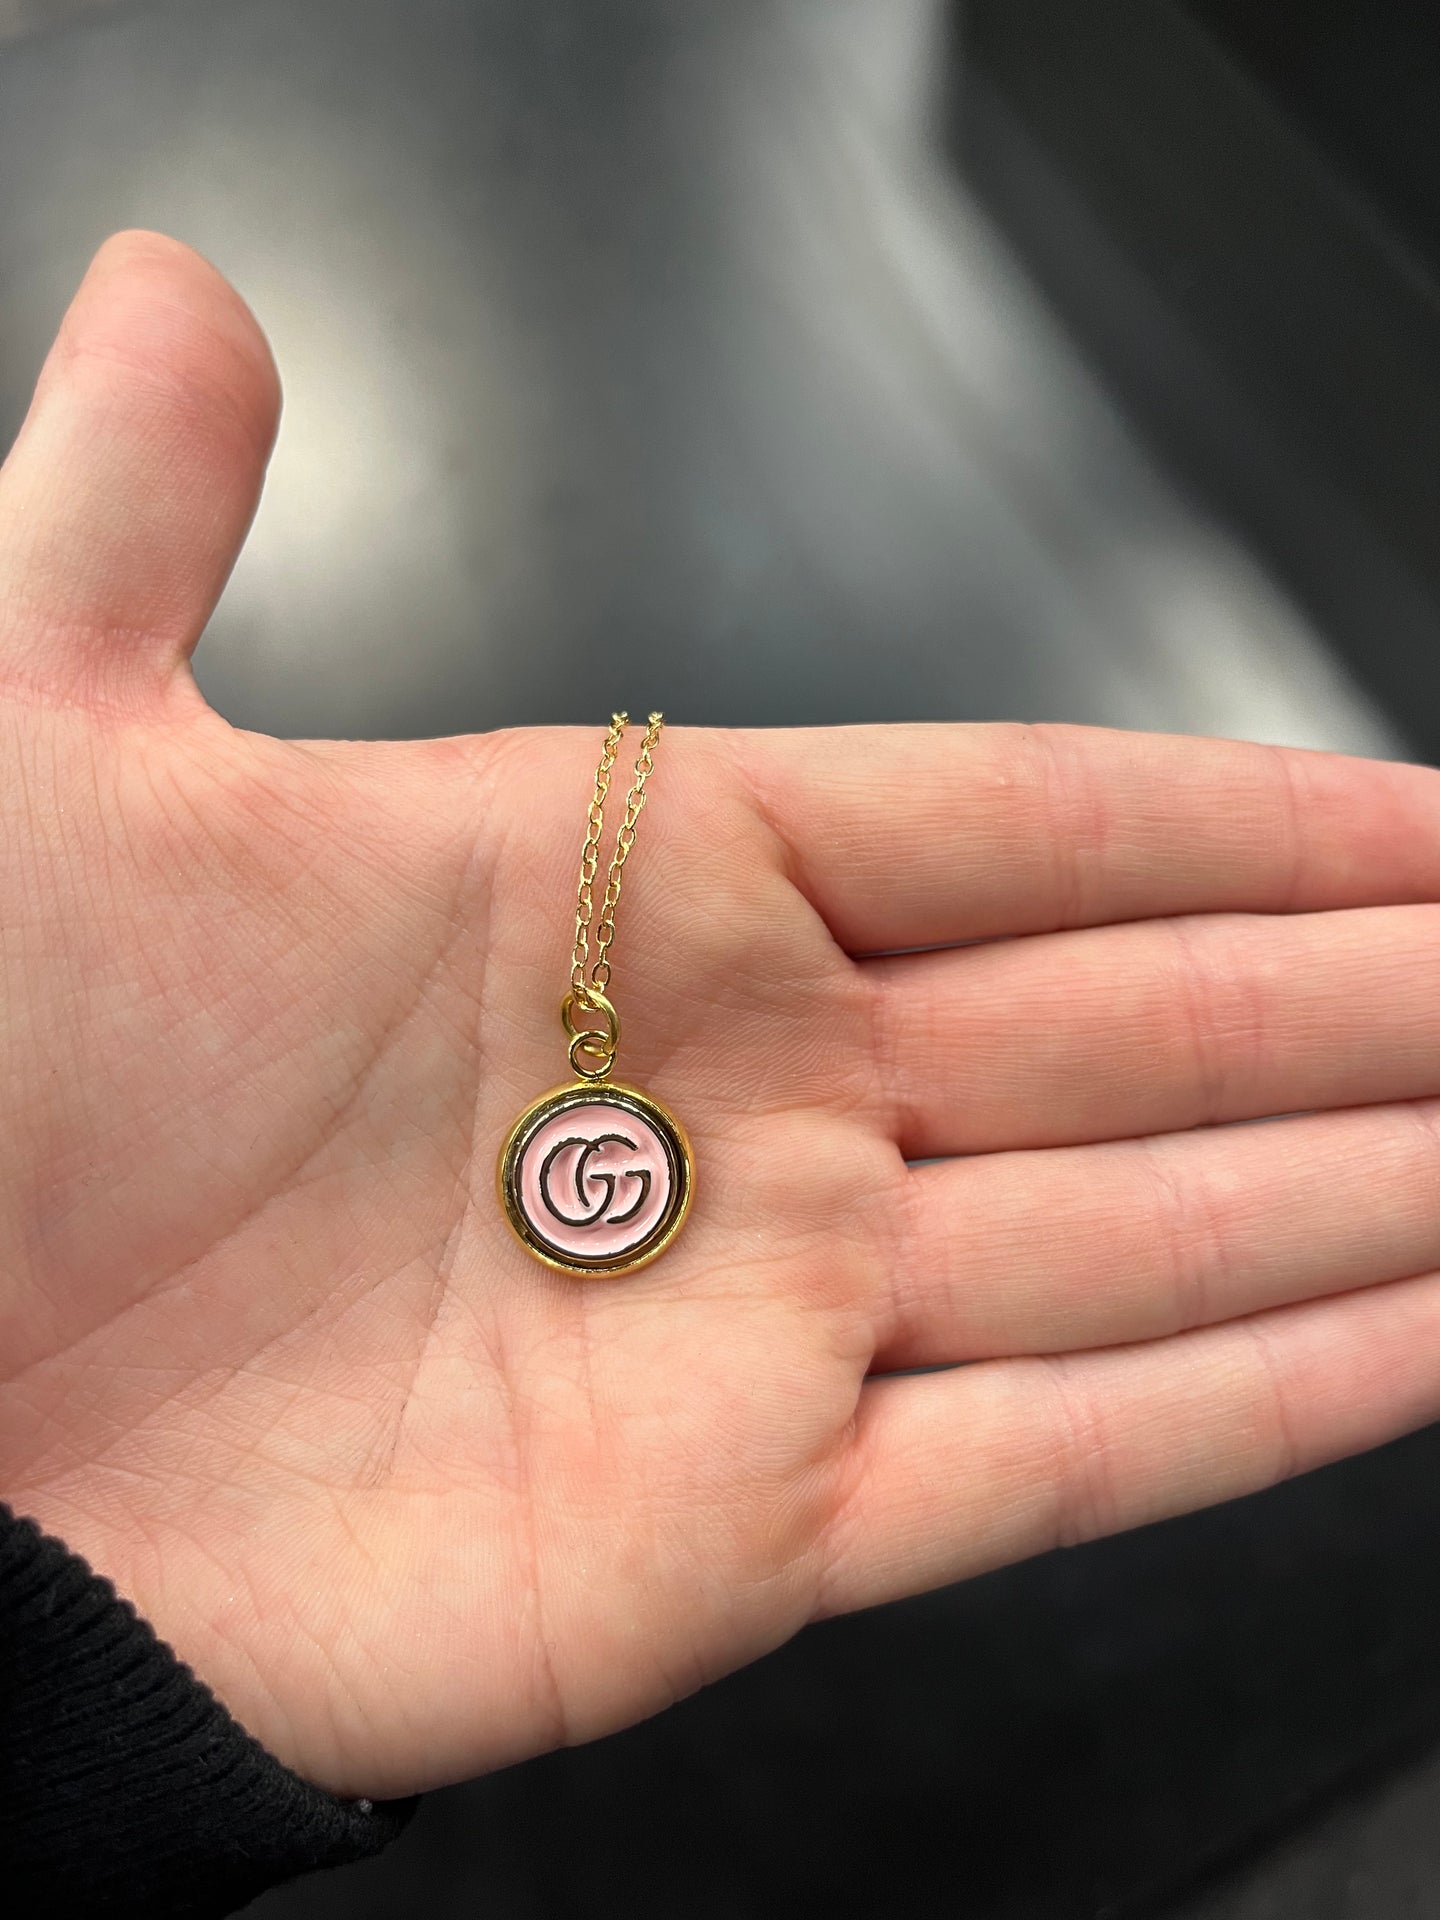 Pink Gucci Pendant Necklace